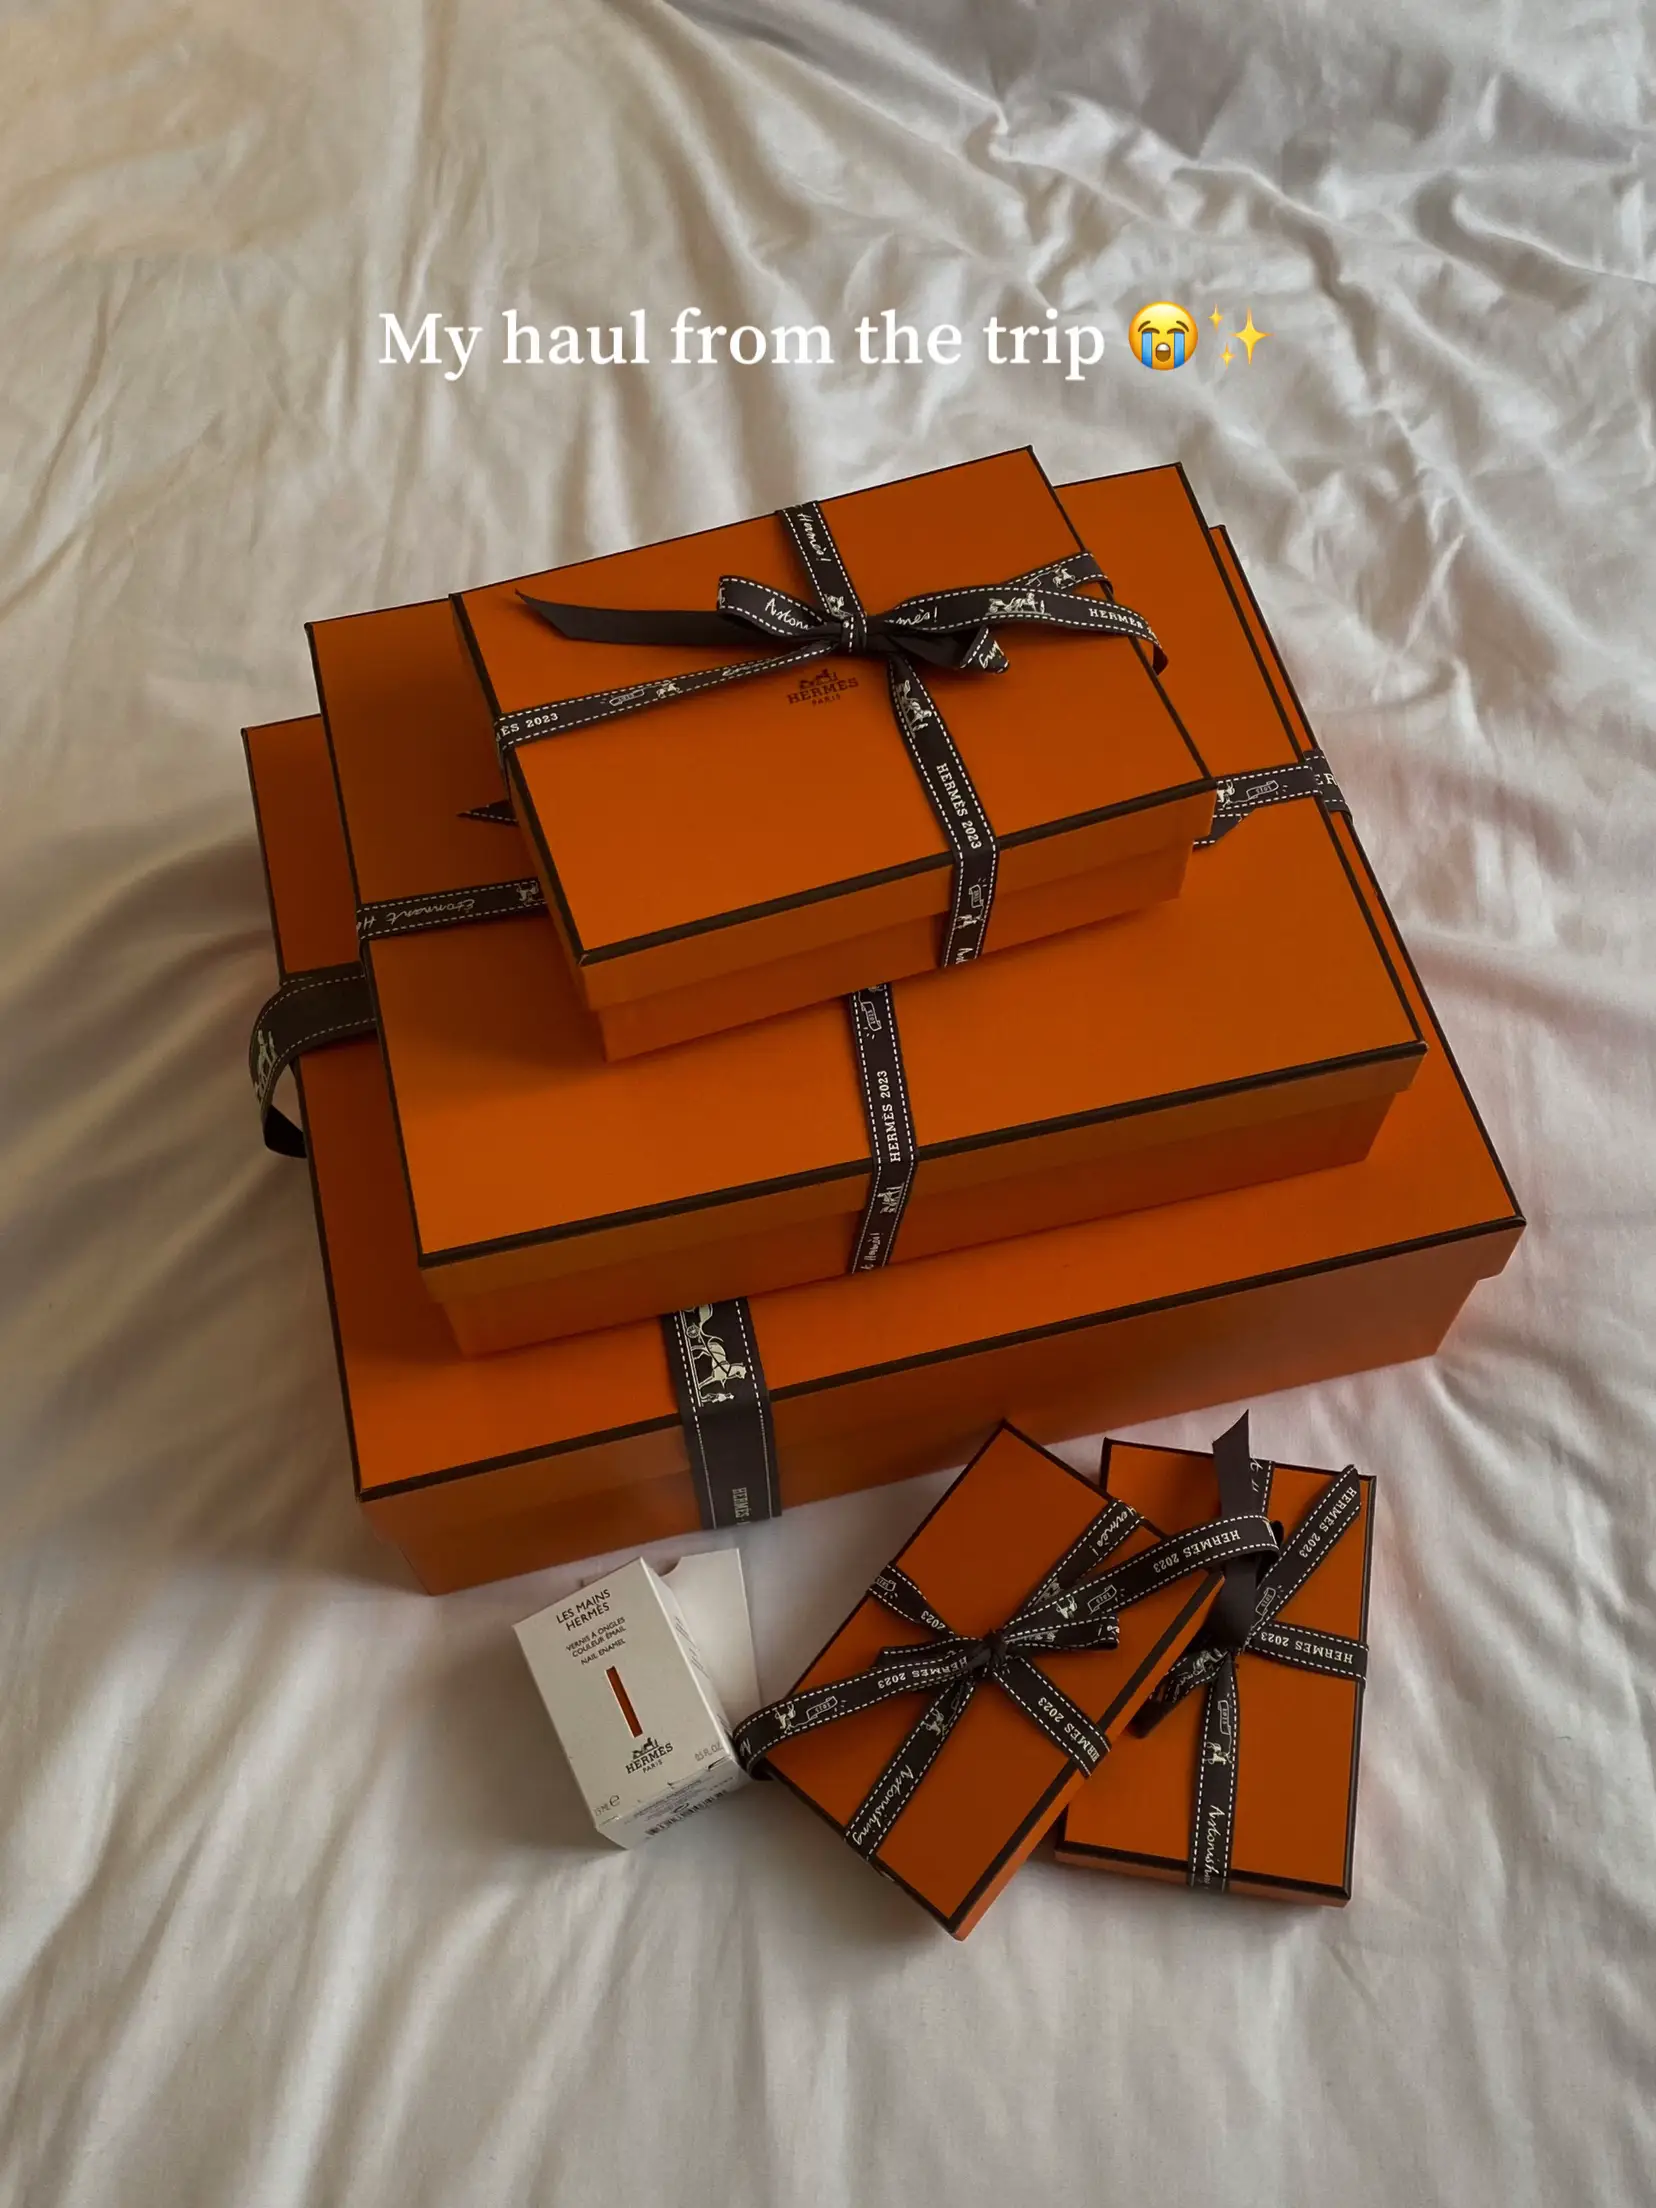 Storytime of how I got my dream bag from Hermes 🥹✨'s images(6)